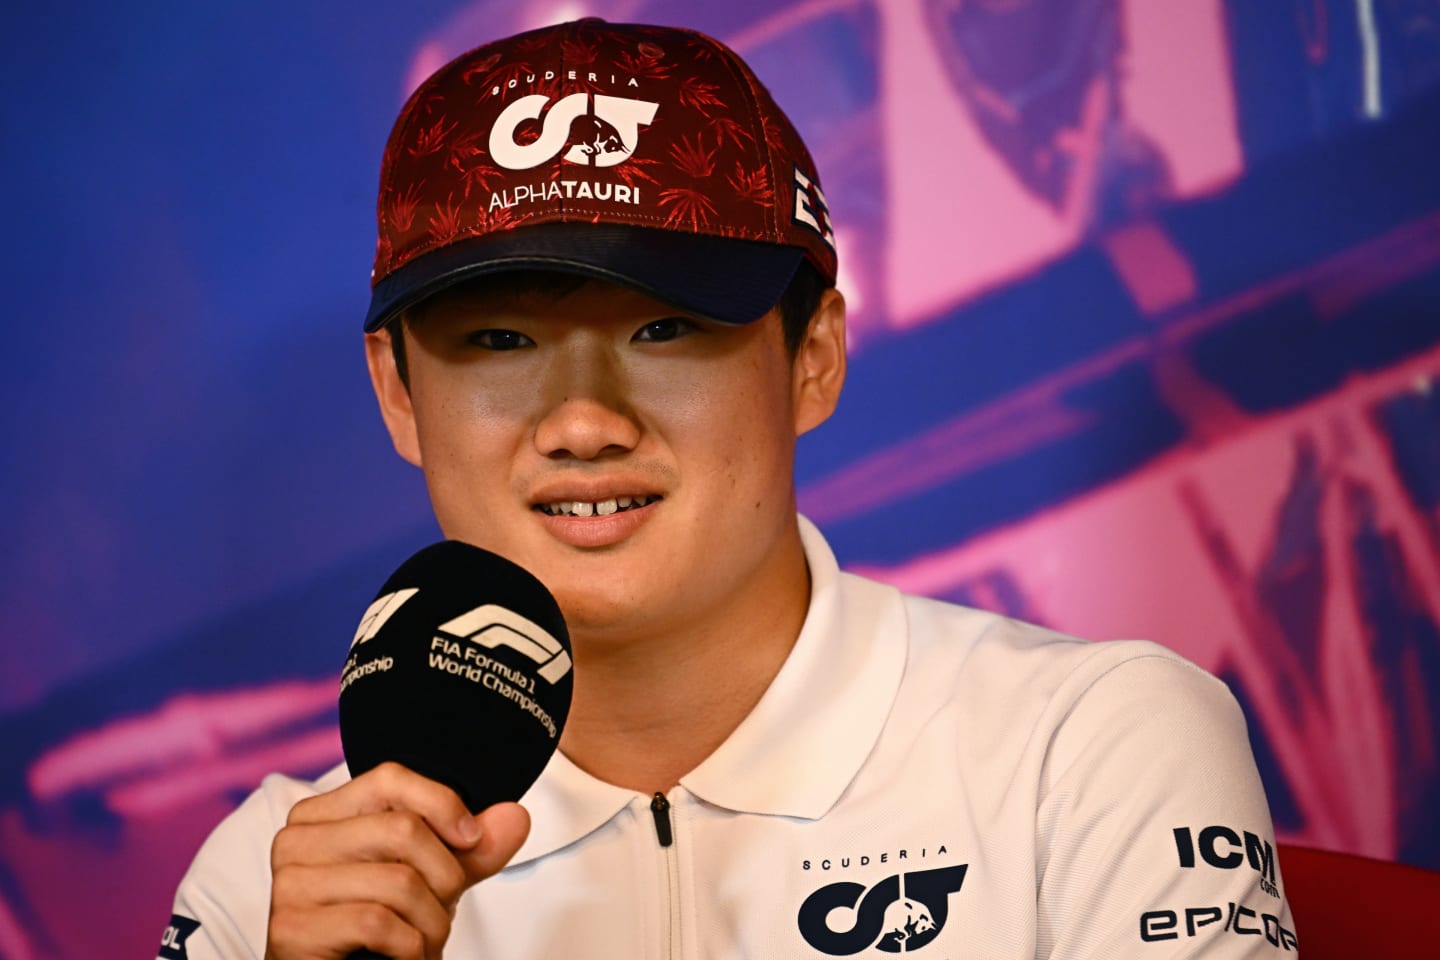 MONTREAL, QUEBEC - JUNE 17: Yuki Tsunoda of Japan and Scuderia AlphaTauri talks in the Drivers Press Conference prior to practice ahead of the F1 Grand Prix of Canada at Circuit Gilles Villeneuve on June 17, 2022 in Montreal, Quebec. (Photo by Clive Mason/Getty Images)